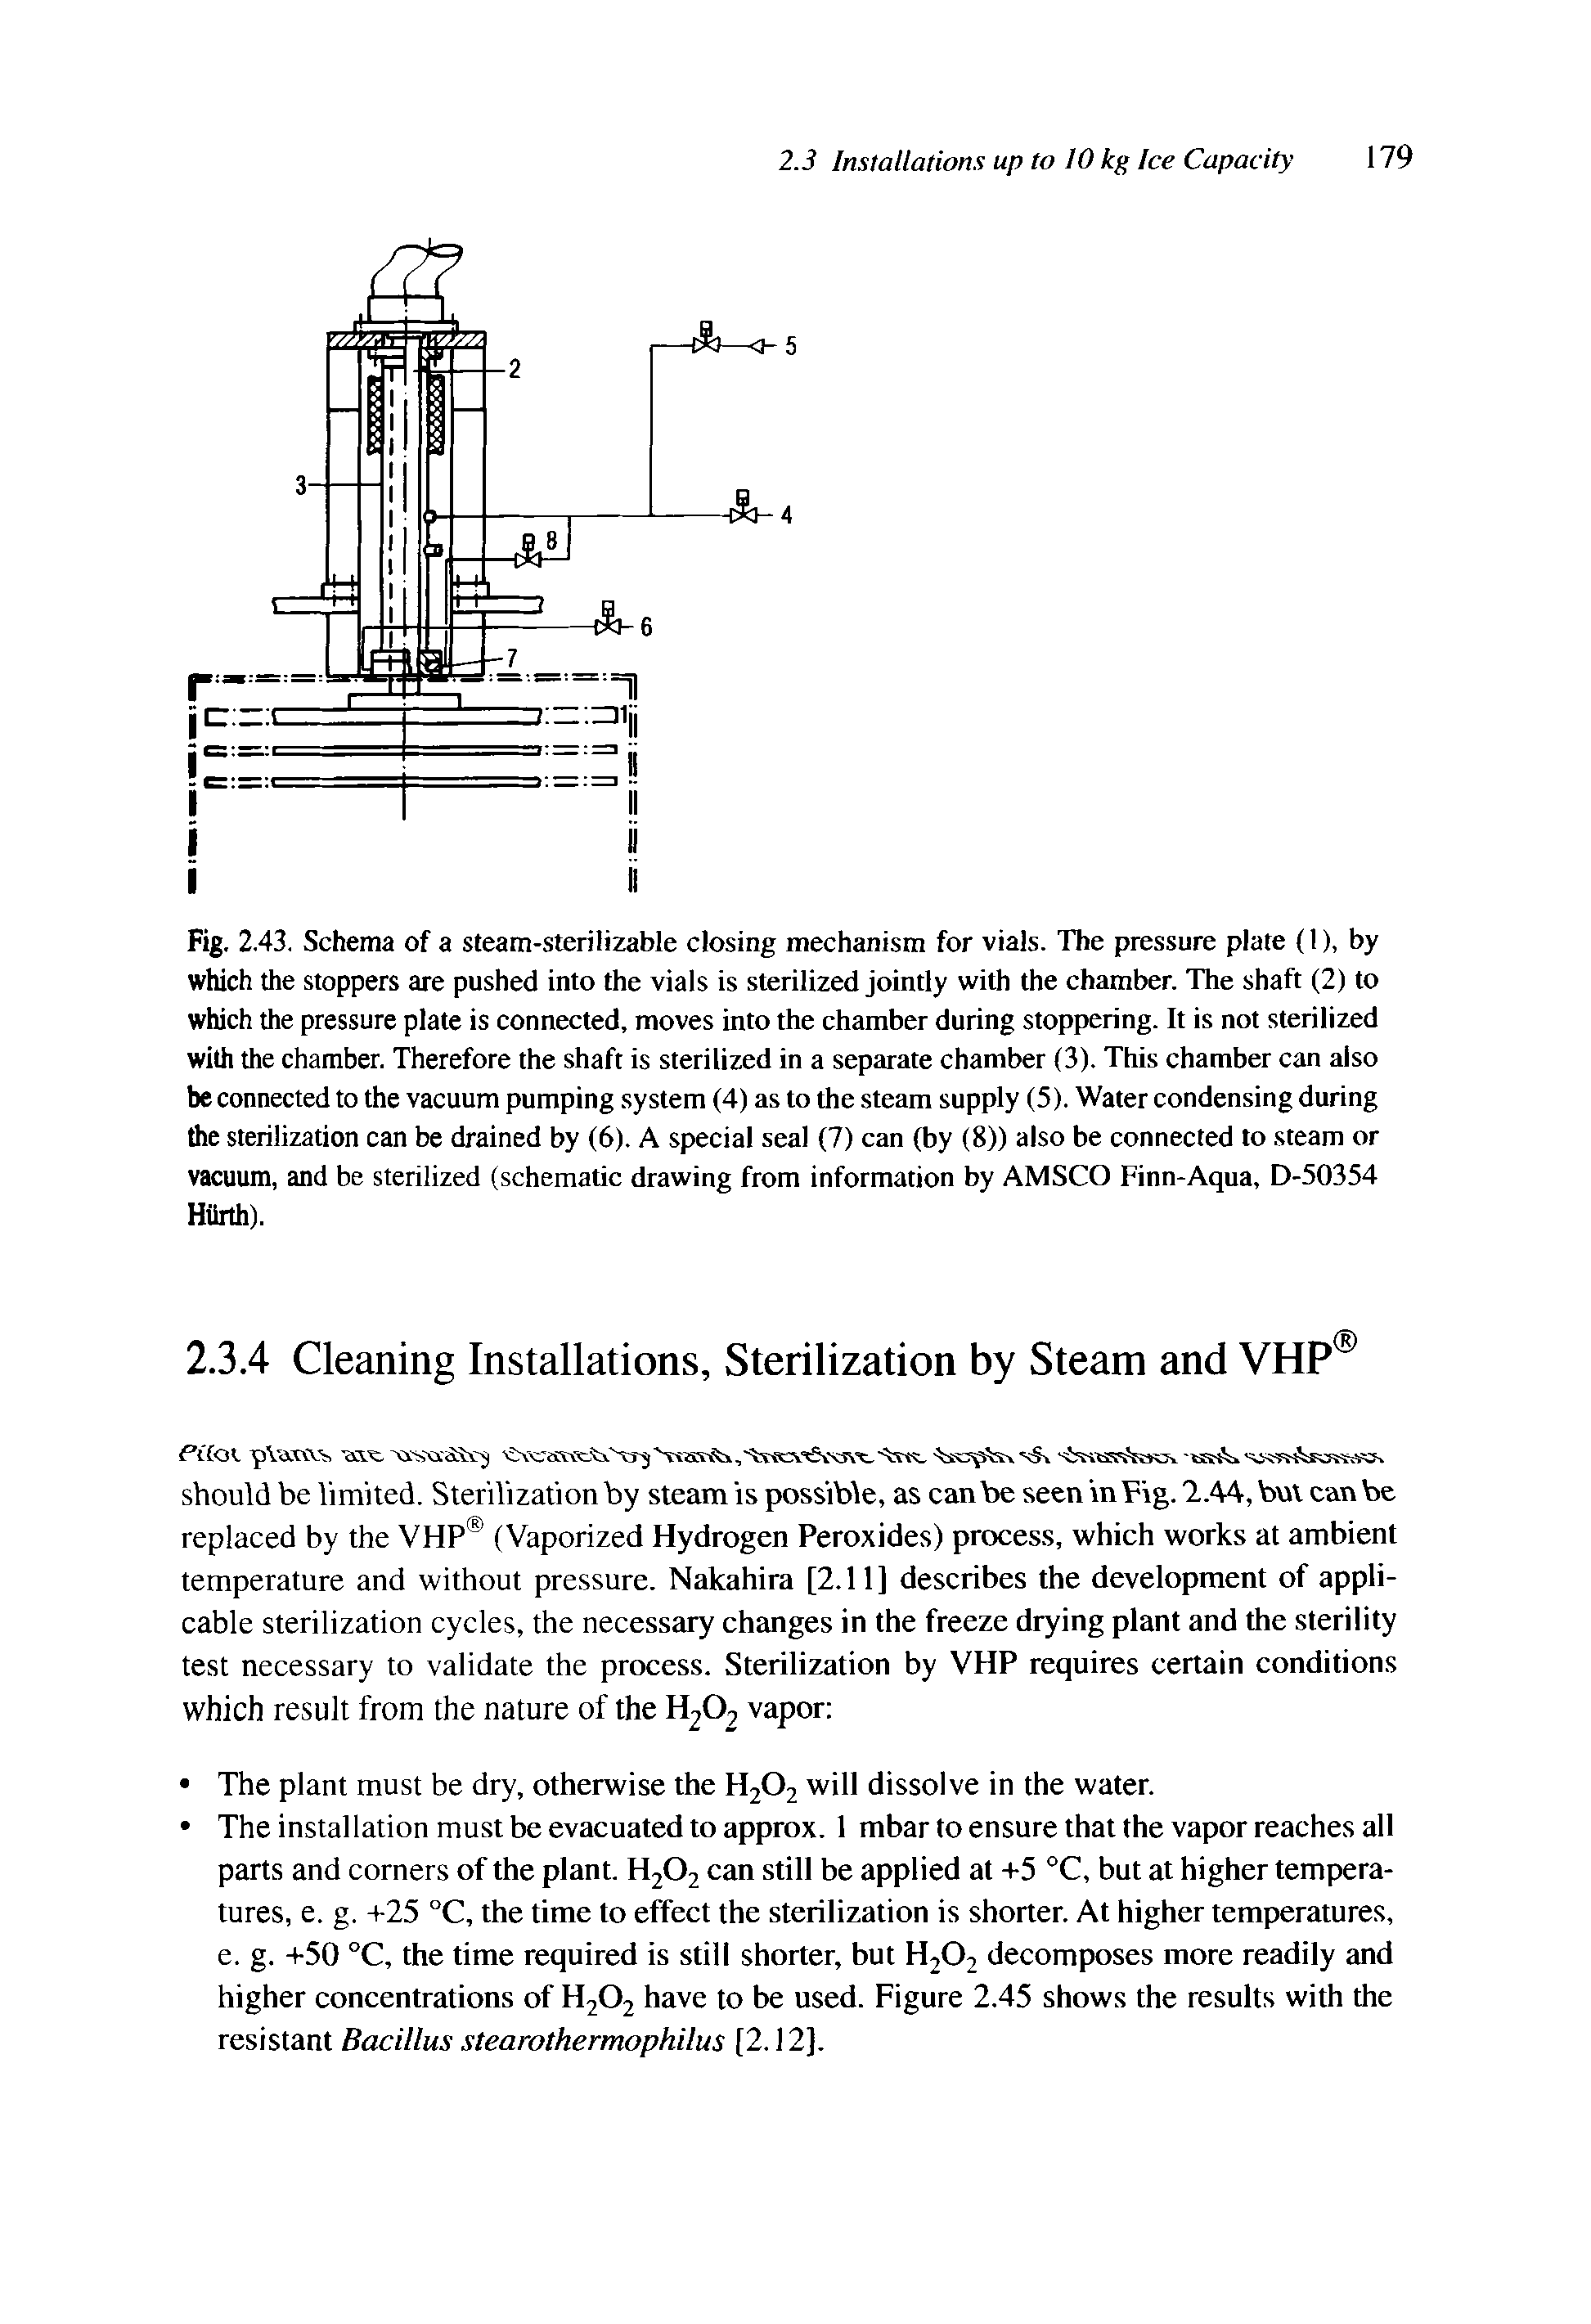 Fig. 2.43. Schema of a steam-sterilizable closing mechanism for vials. The pressure plate (1), by which the stoppers are pushed into the vials is sterilized jointly with the chamber. The shaft (2) to which the pressure plate is connected, moves into the chamber during stoppering. It is not sterilized with the chamber. Therefore the shaft is sterilized in a separate chamber (3). This chamber can also be connected to the vacuum pumping system (4) as to the steam supply (5). Water condensing during the sterilization can be drained by (6). A special seal (7) can (by (8)) also be connected to steam or vacuum, and be sterilized (schematic drawing from information by AMSCO Finn-Aqua, D-50354 Hiirth).